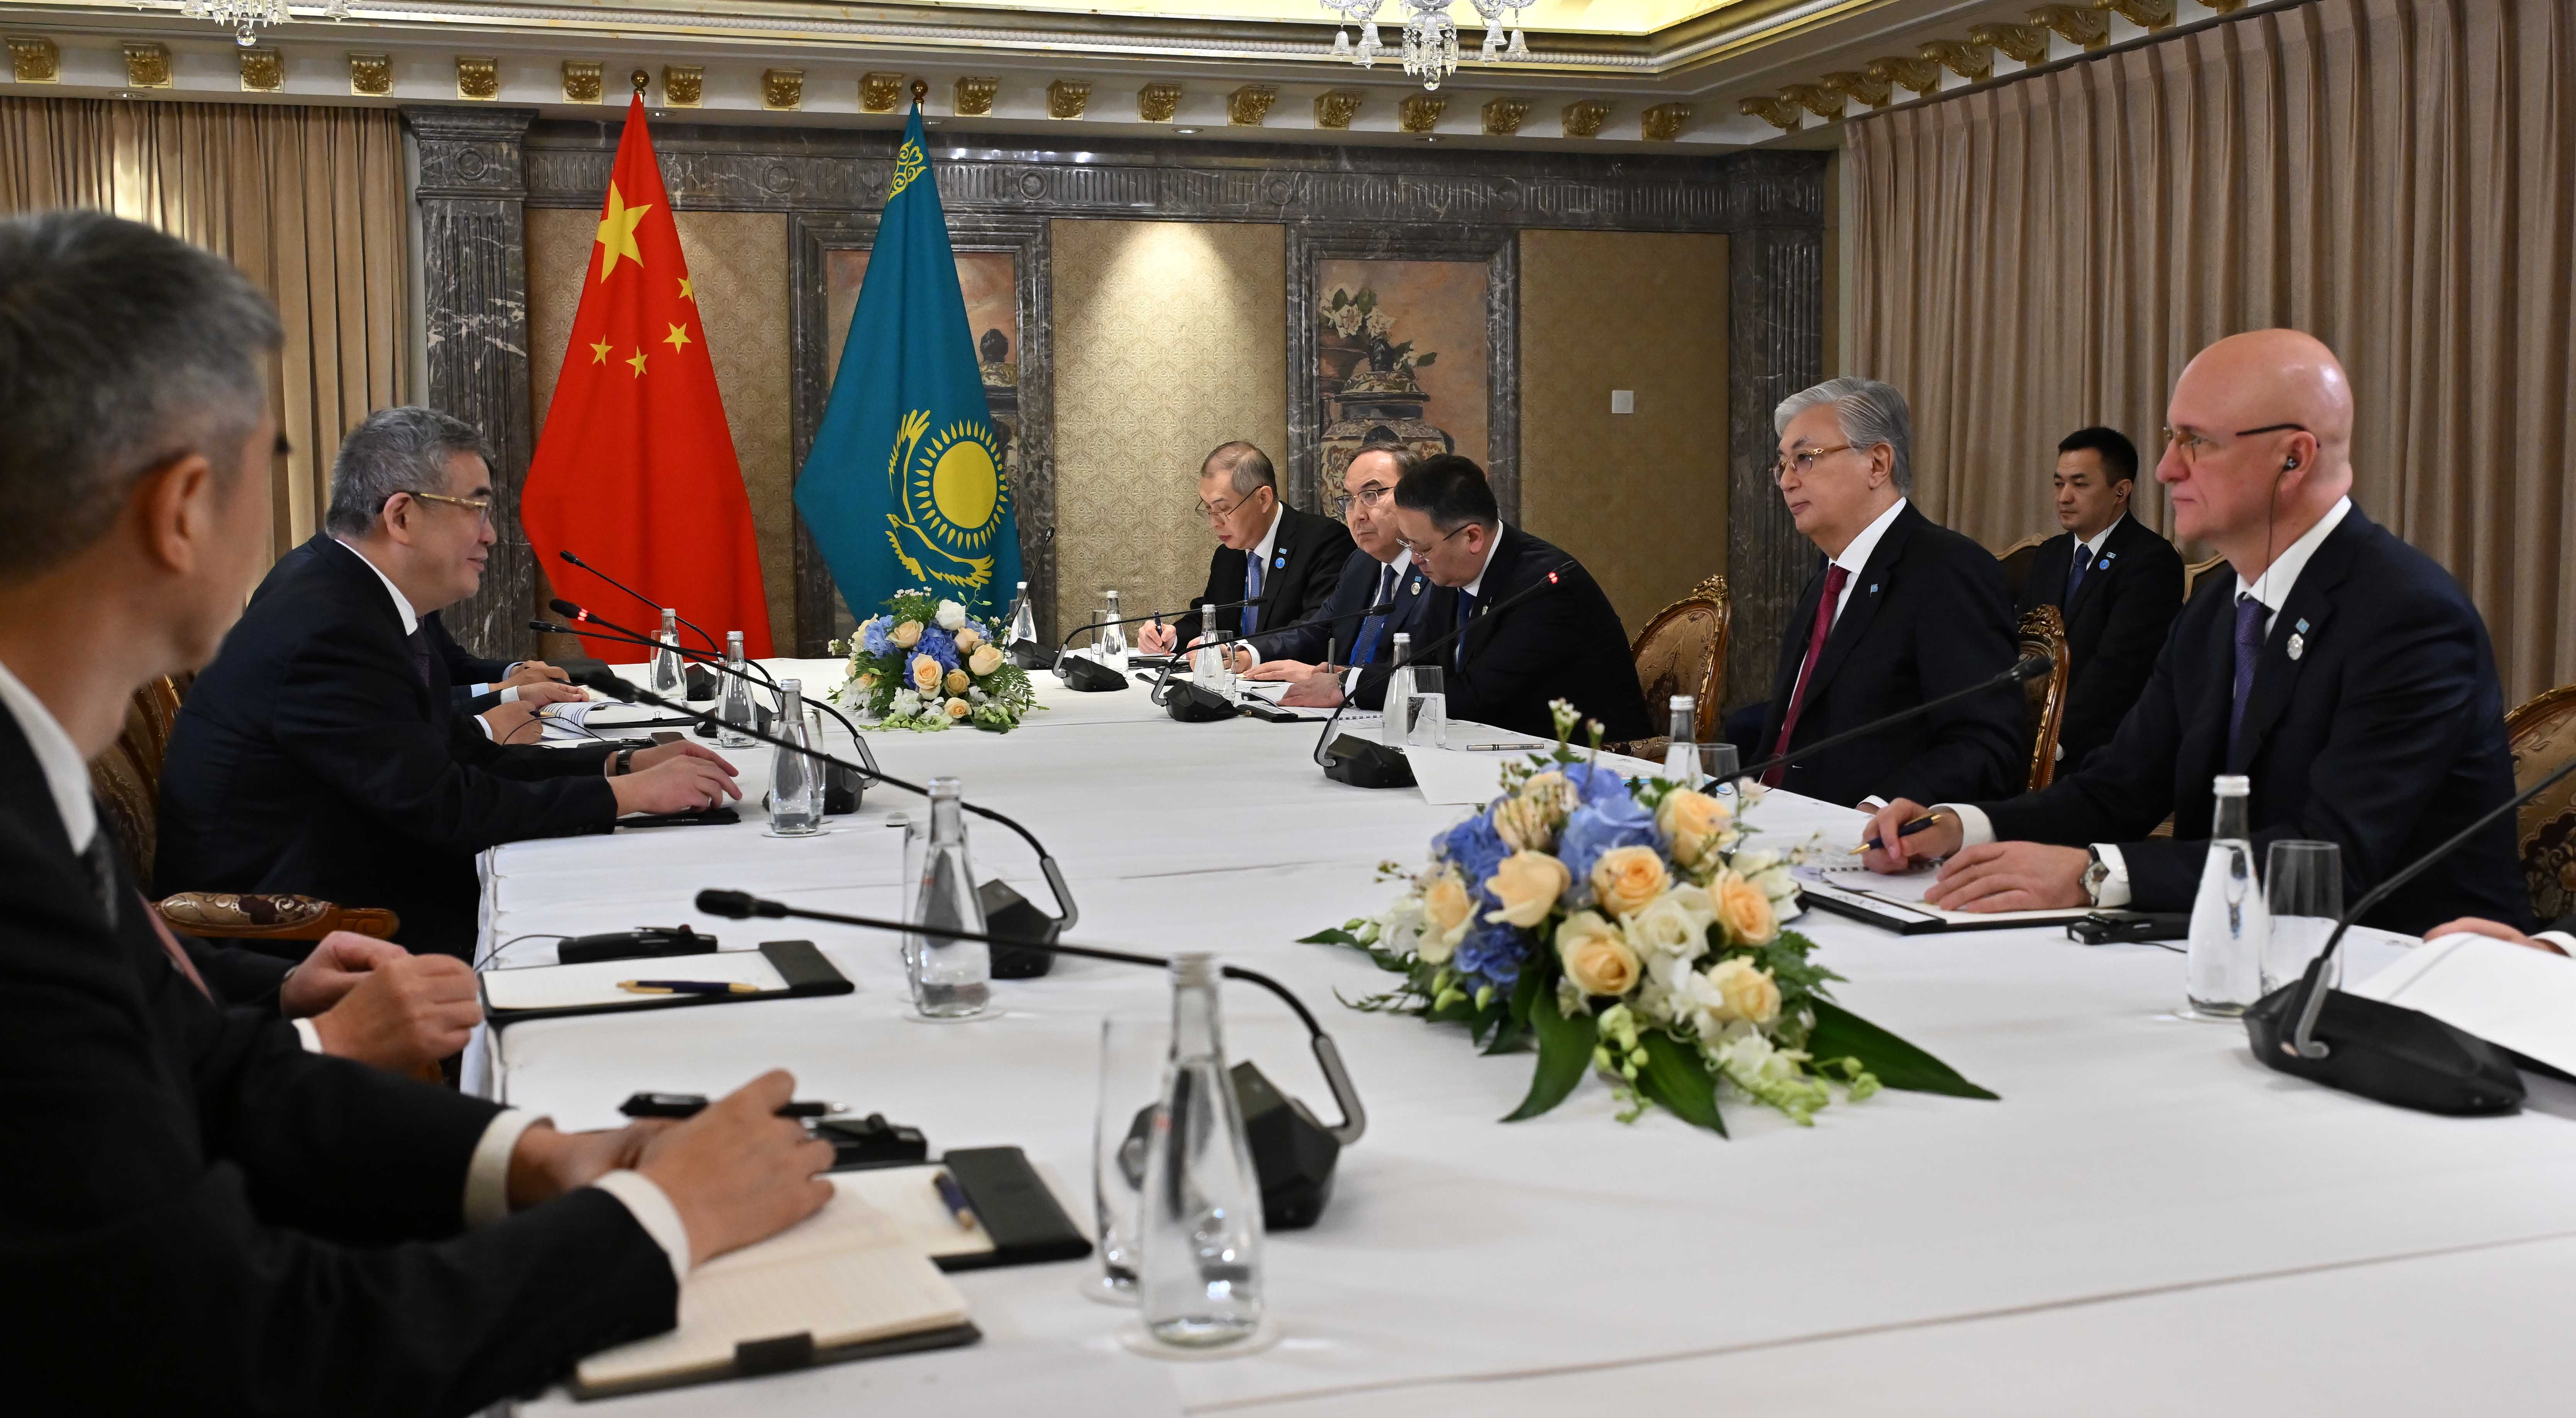 Kazakhstan's president strengthens China ties in $2bn CITIC meeting 